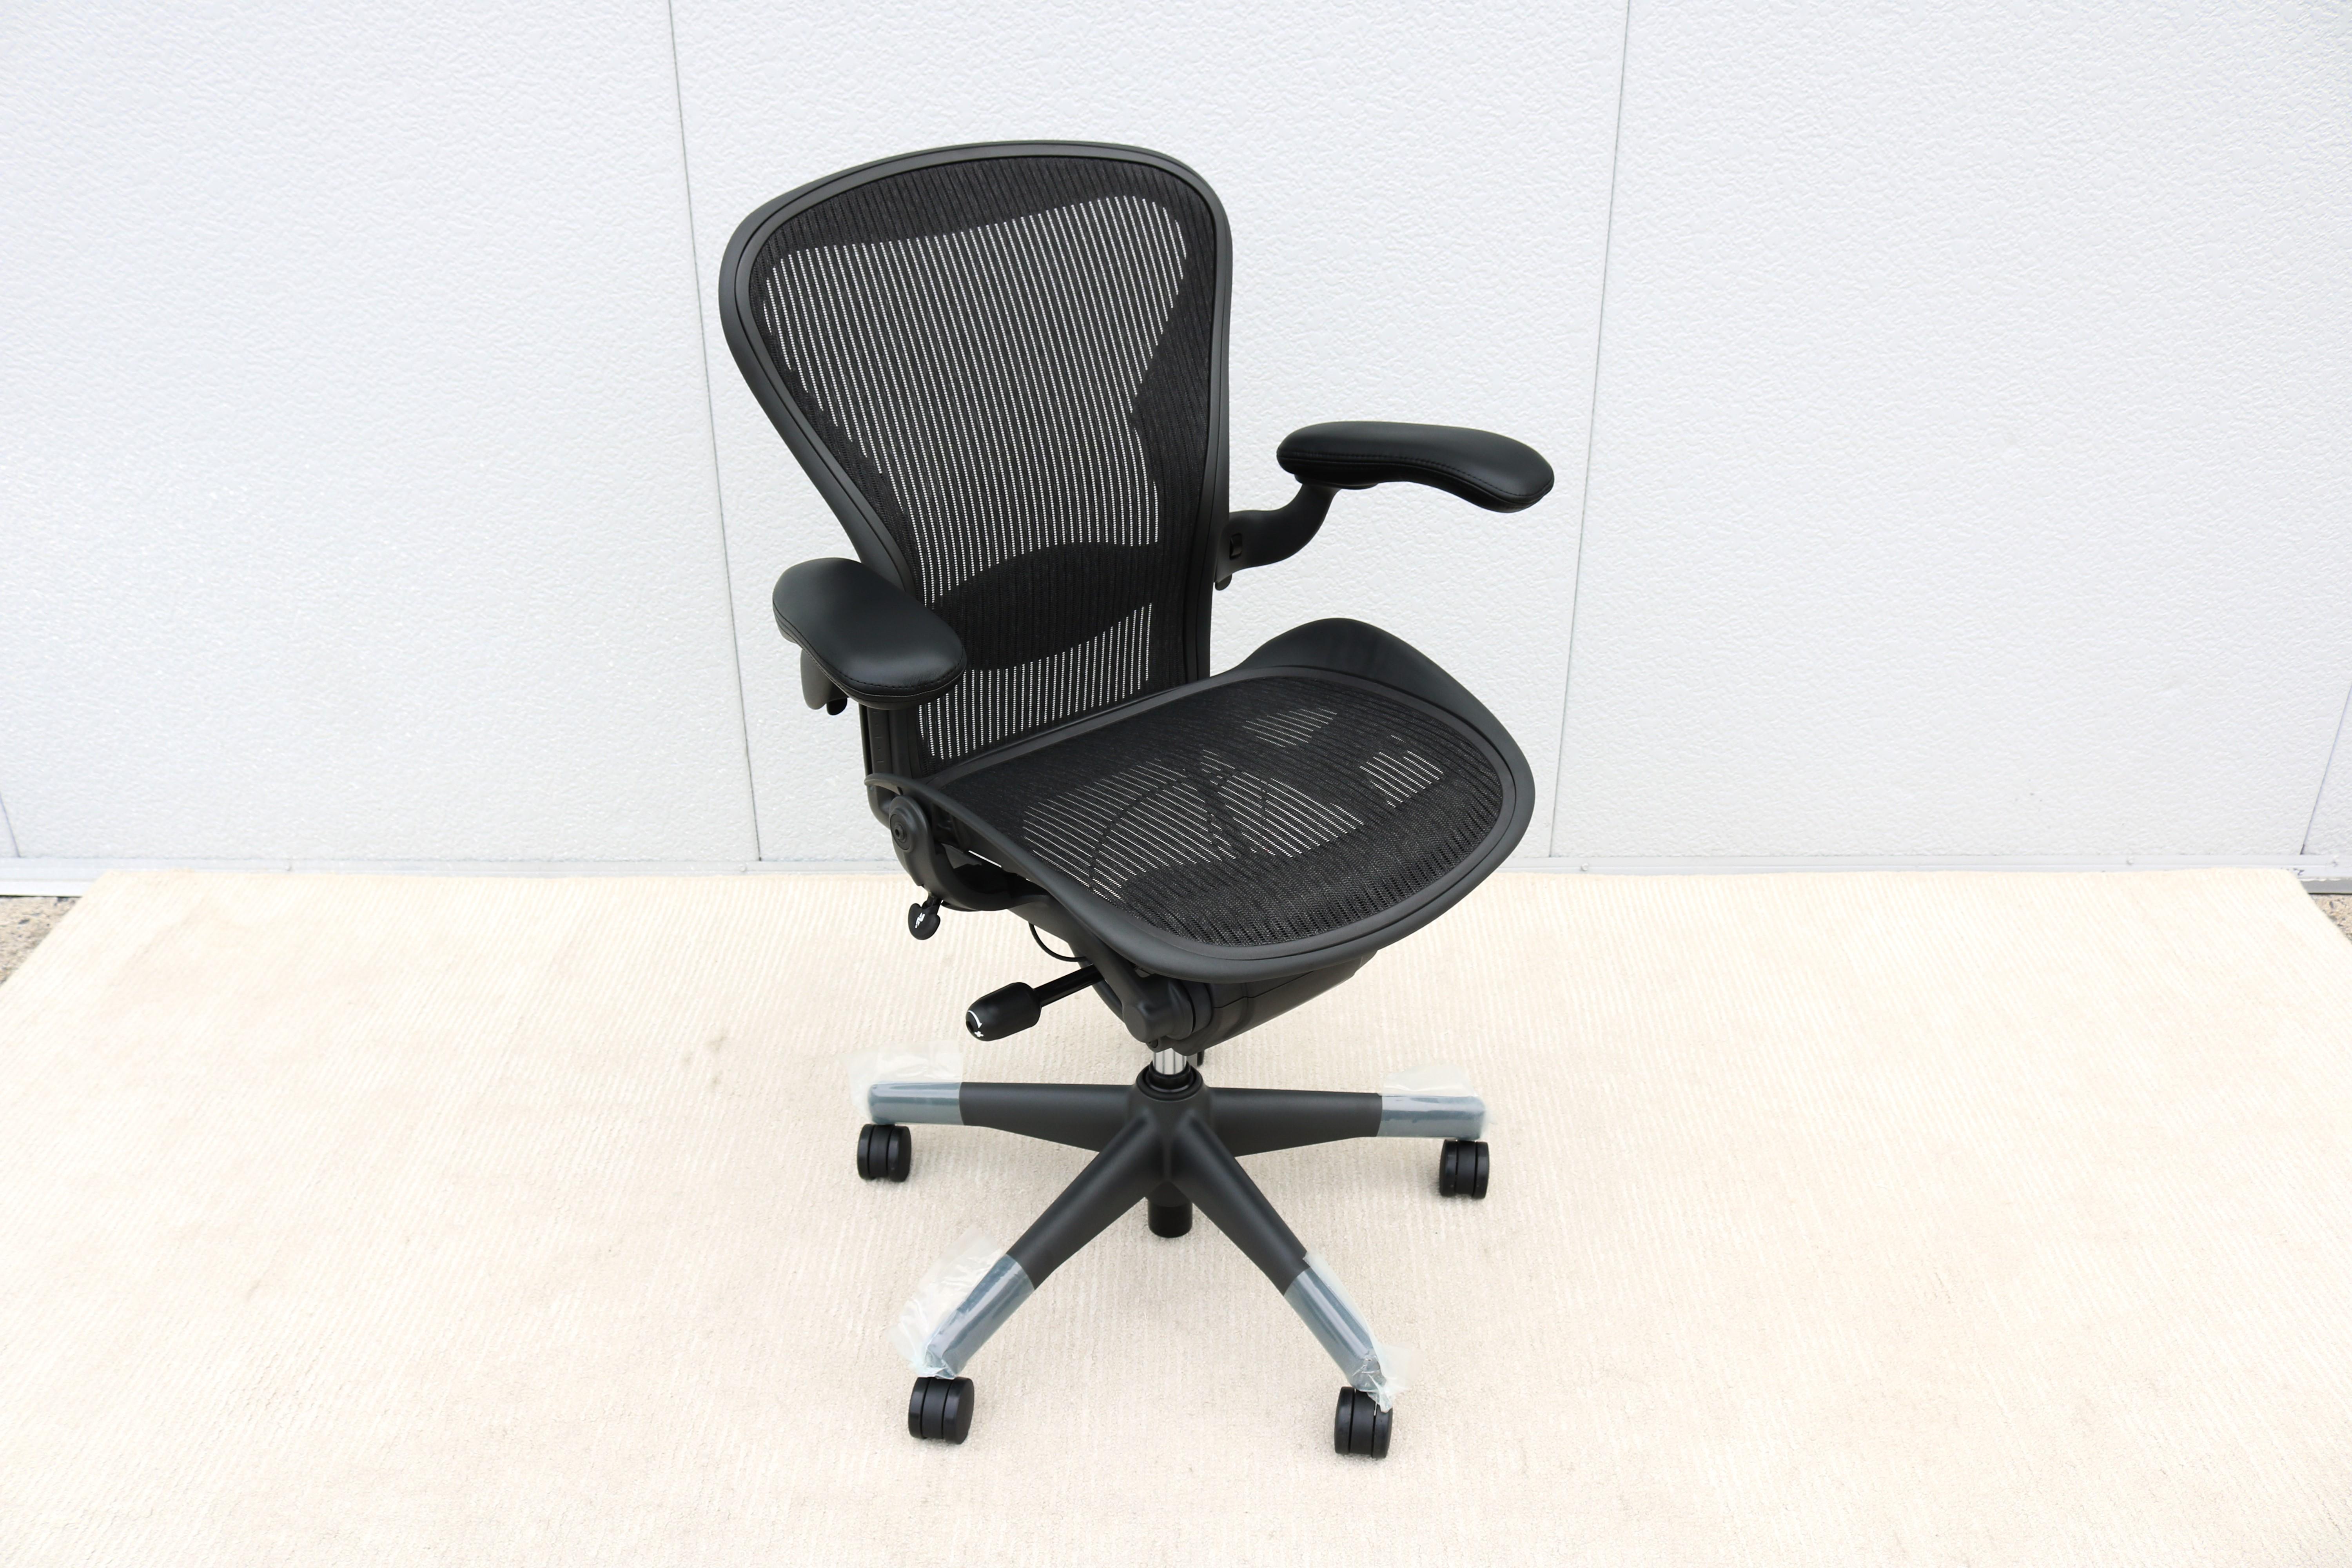 American Herman Miller Aeron Chair Size B Fully Adjustable Brand New, Carbon Mesh Fabric For Sale